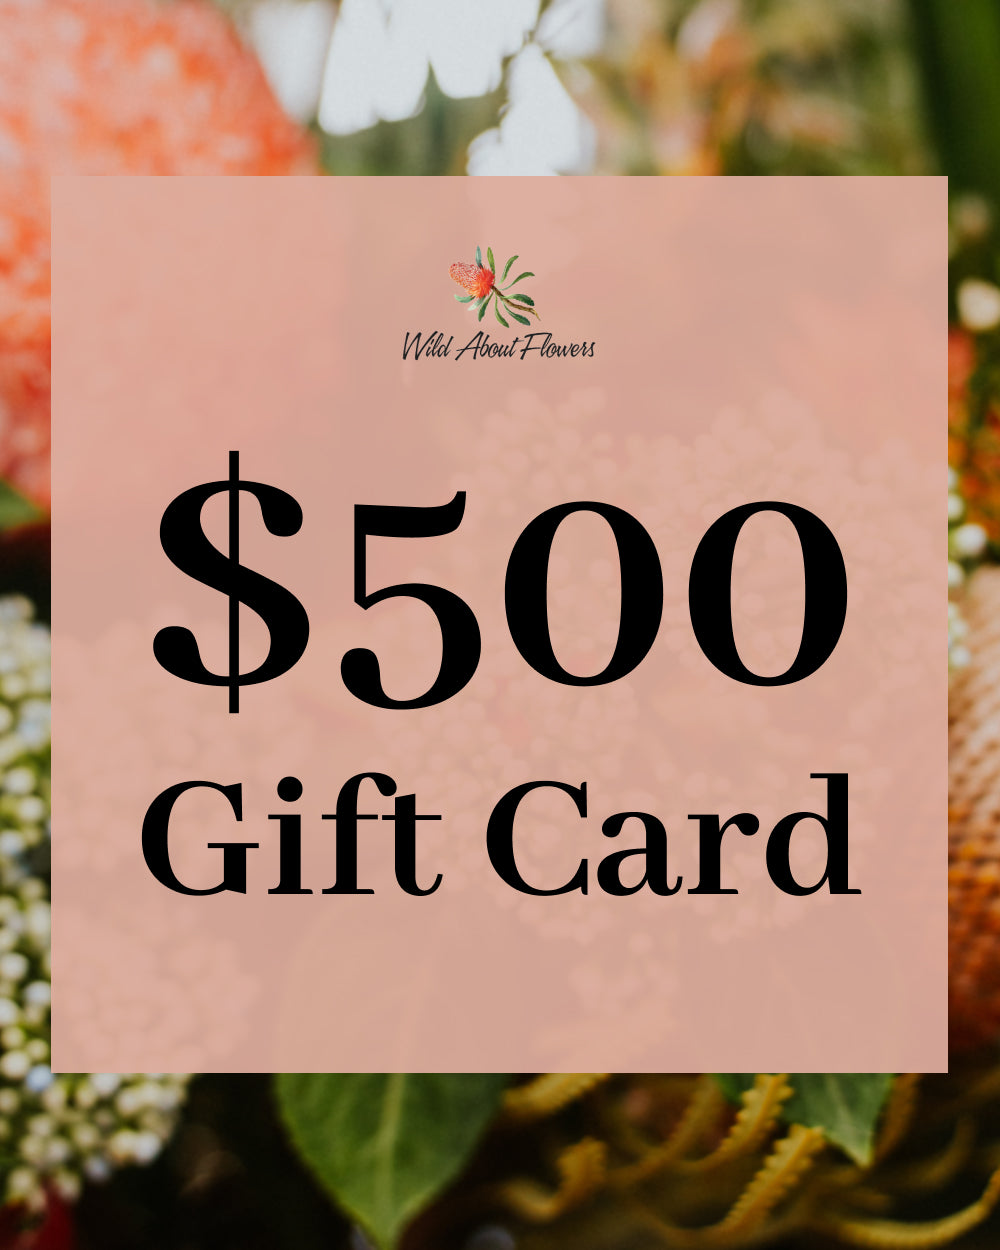 Wild About Flowers Gift Card